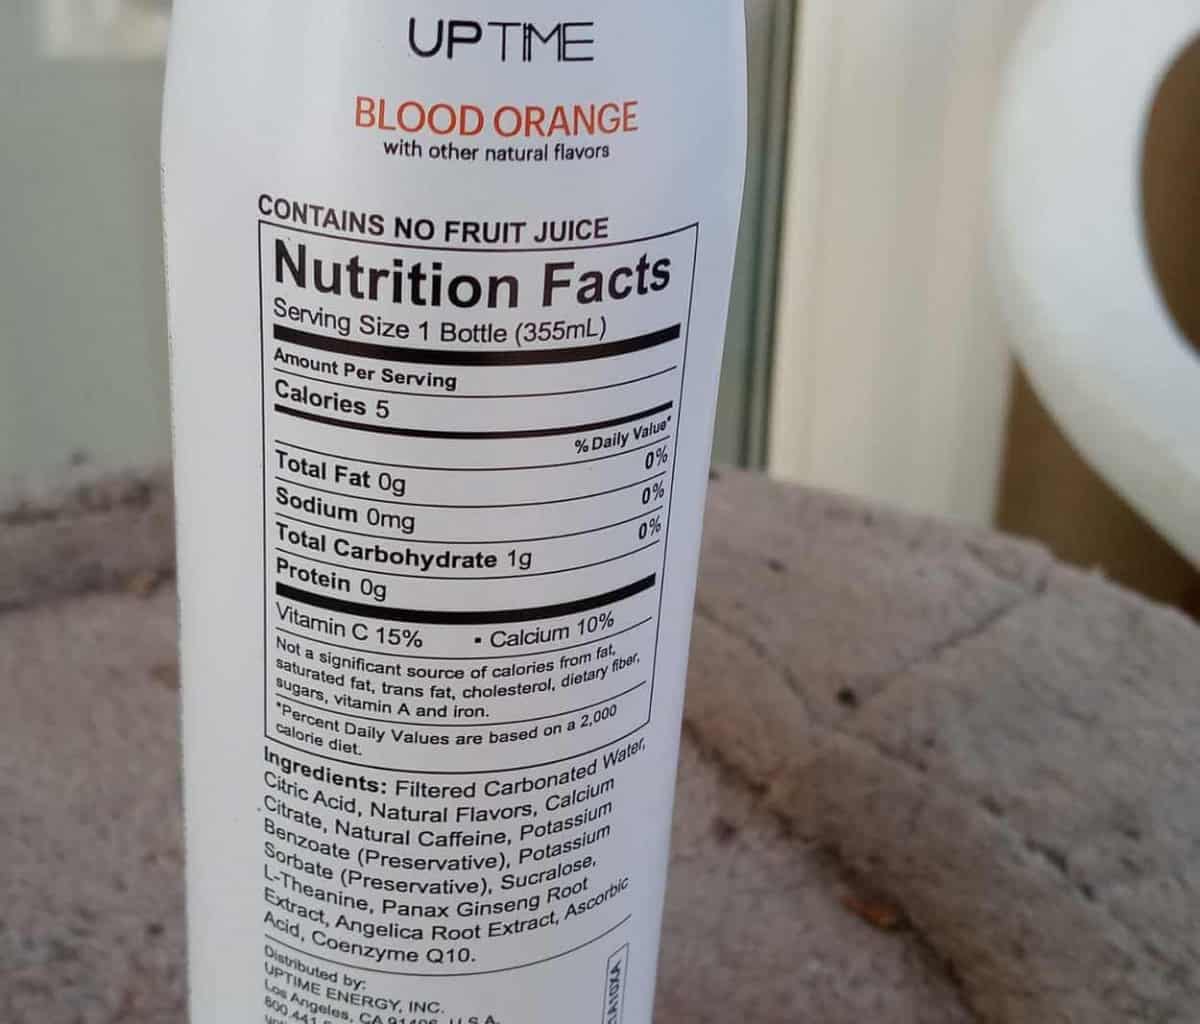 Nutrition facts of Uptime energy drink